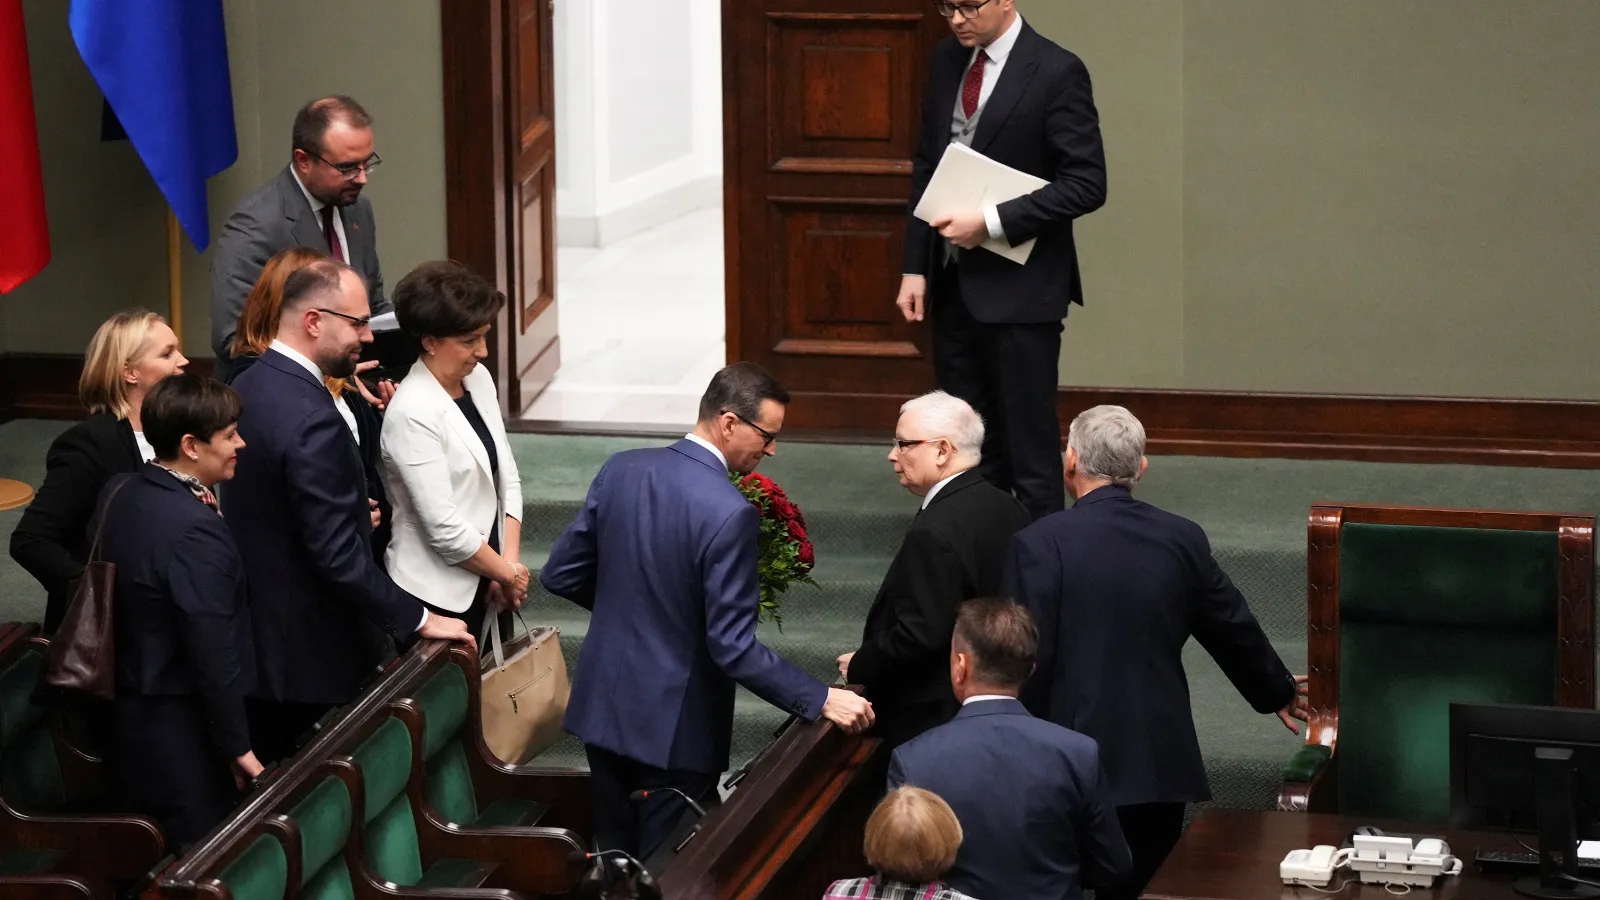 The government lost a confidence vote in the Sejm, the lower house of parliament.

There were 190 votes in favor of the Morawiecki-led government and 266 against.